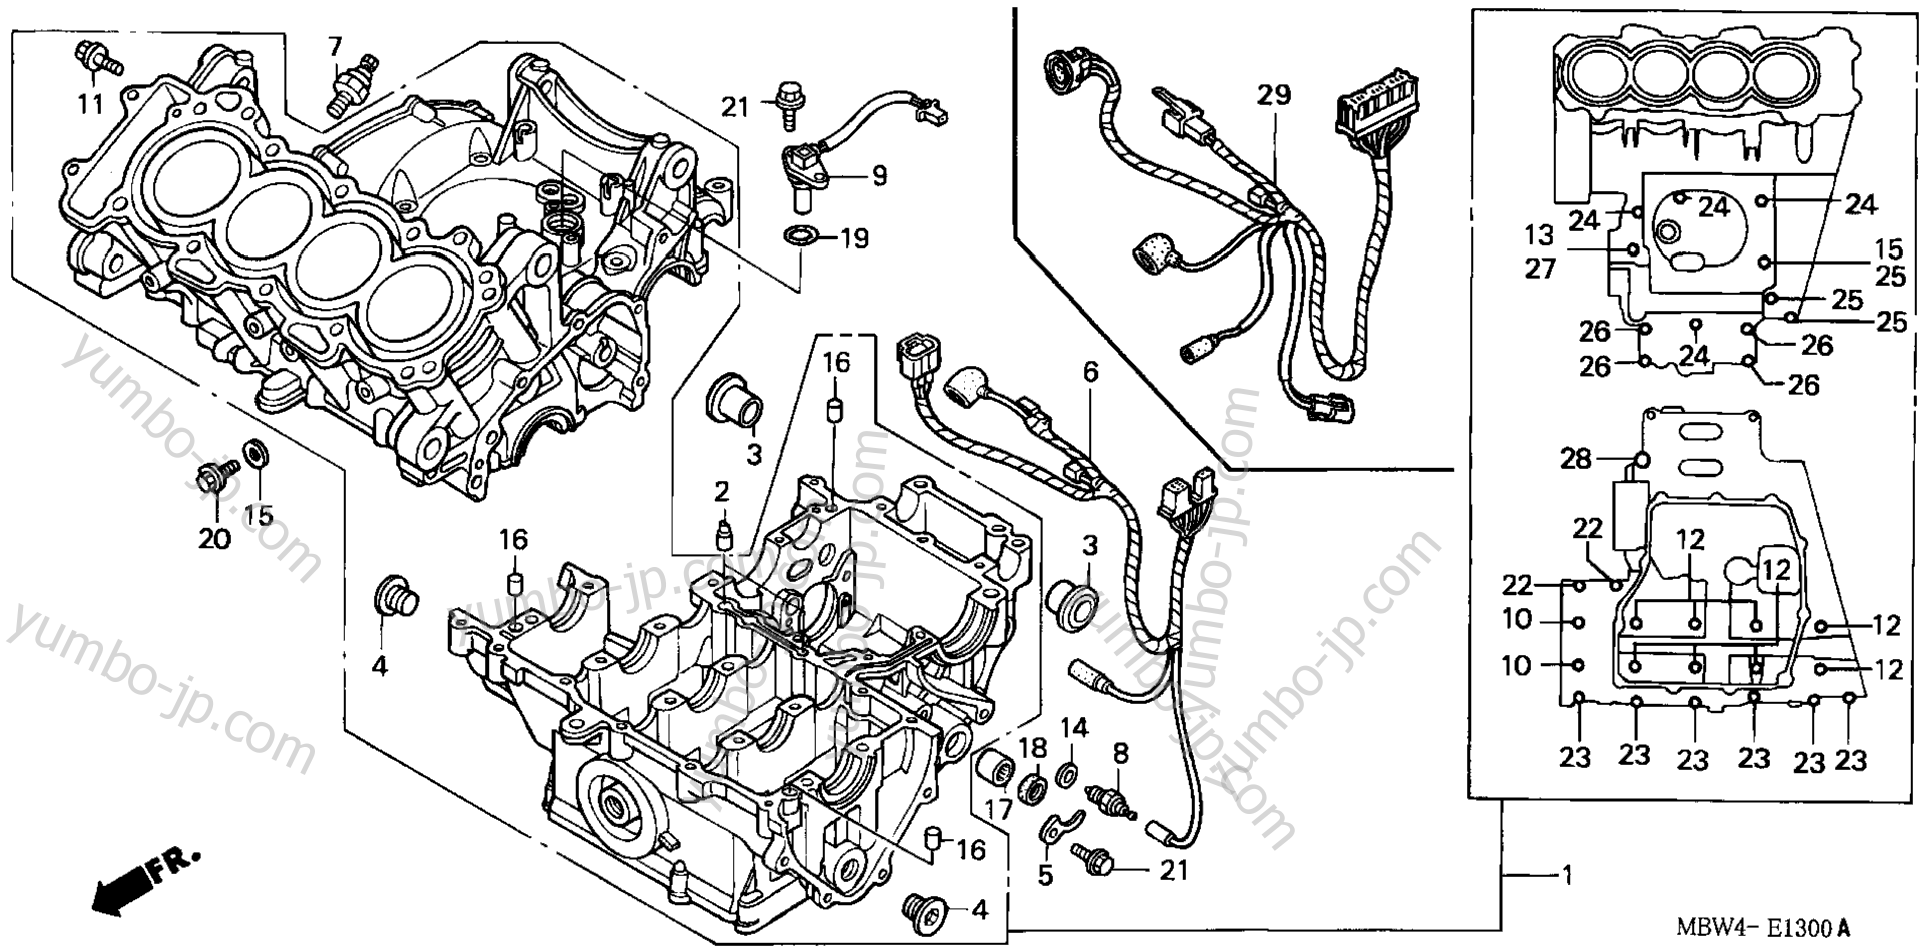 CRANKCASE for motorcycles HONDA CBR600F4 A 2003 year